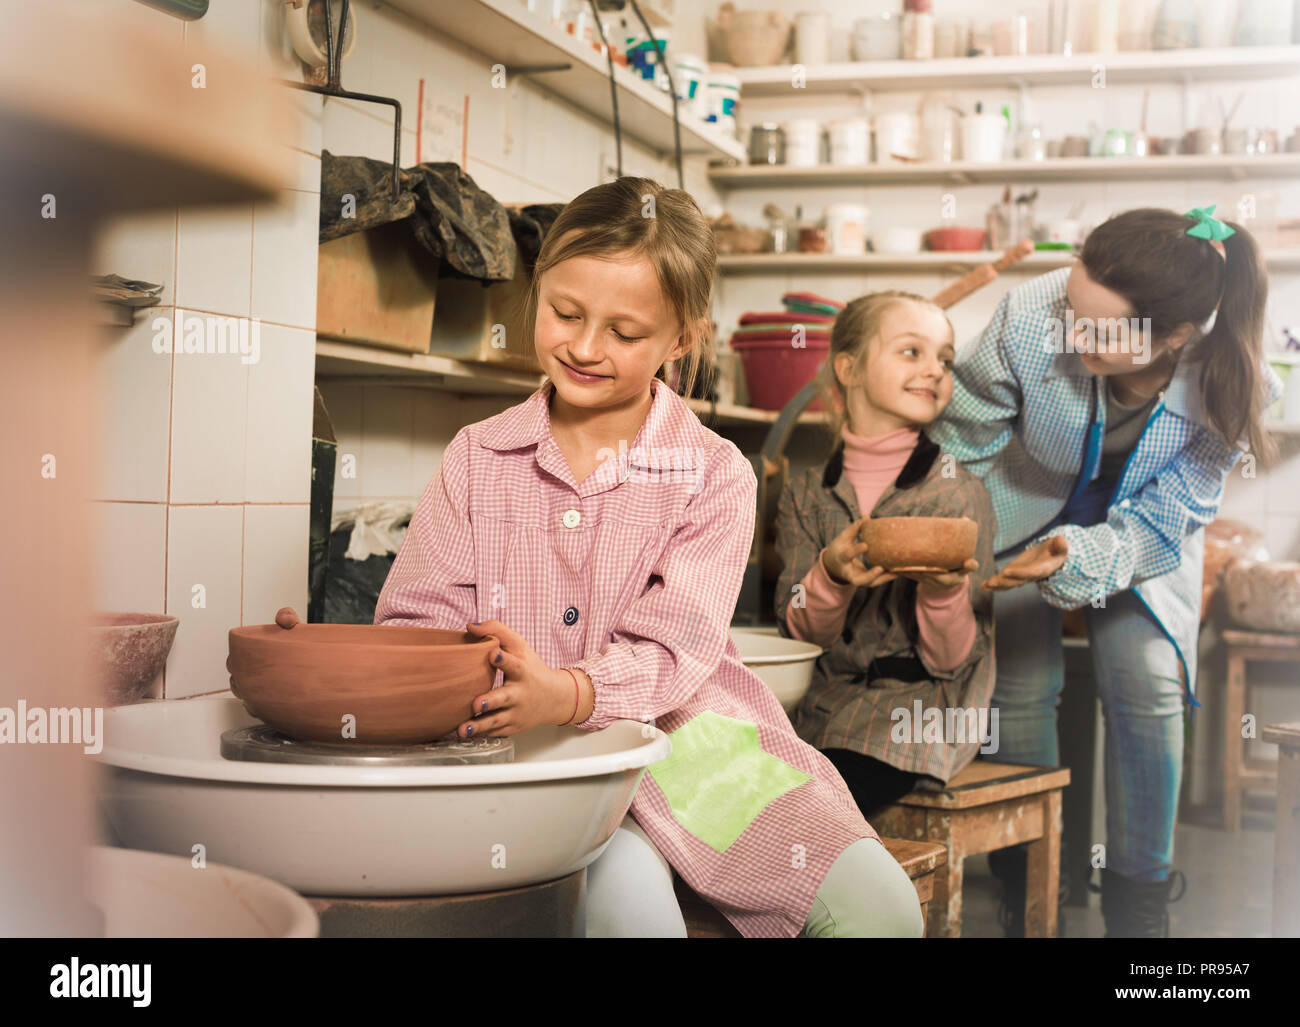 Cheerful positive schoolgirls learning from teacher to make ceramics during arts and crafts class Stock Photo